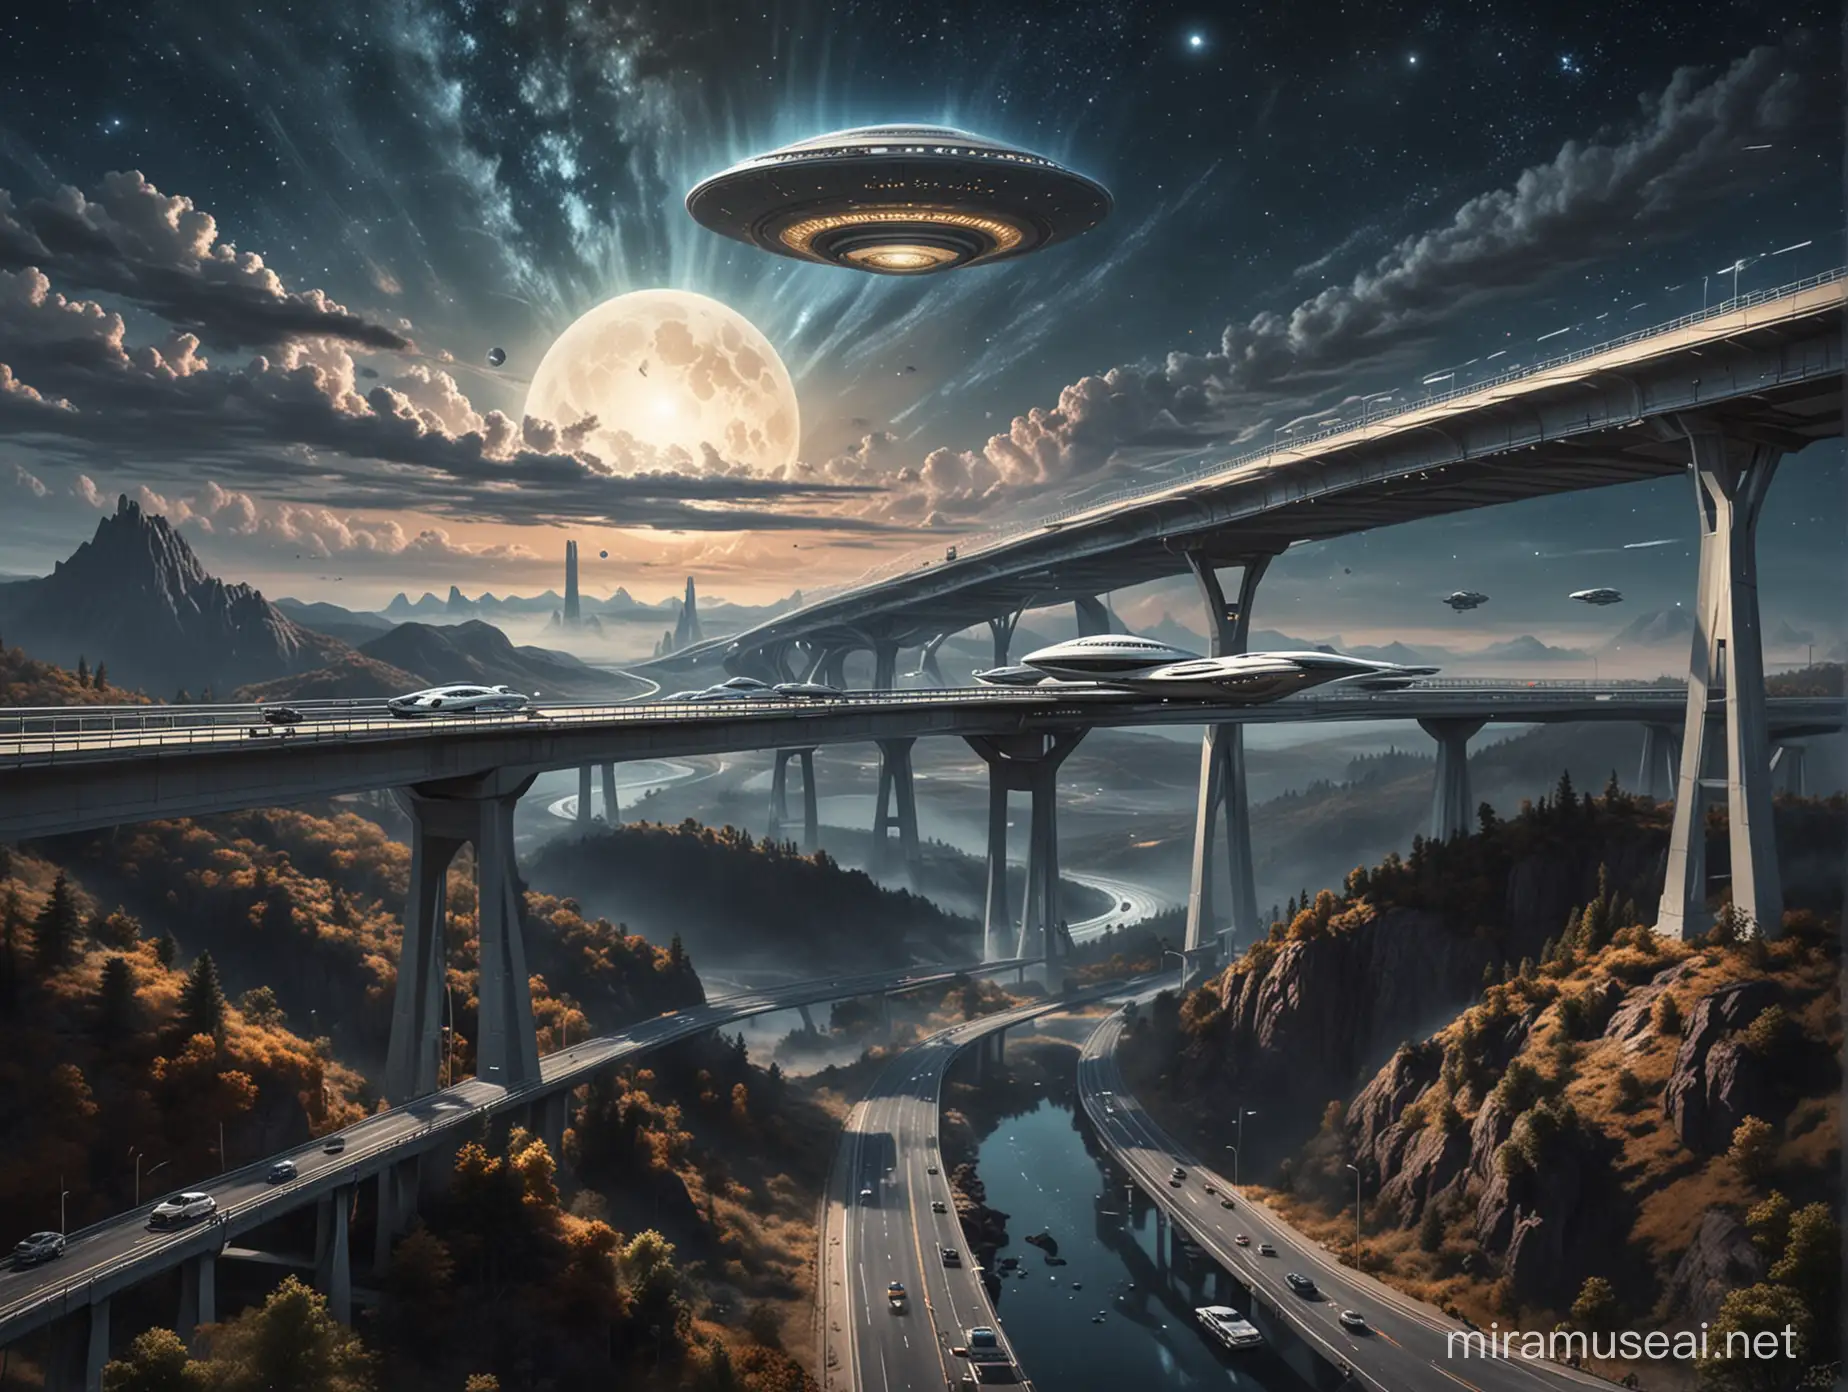 Illustrated Highway Bridges for UFOs in Cosmic Setting